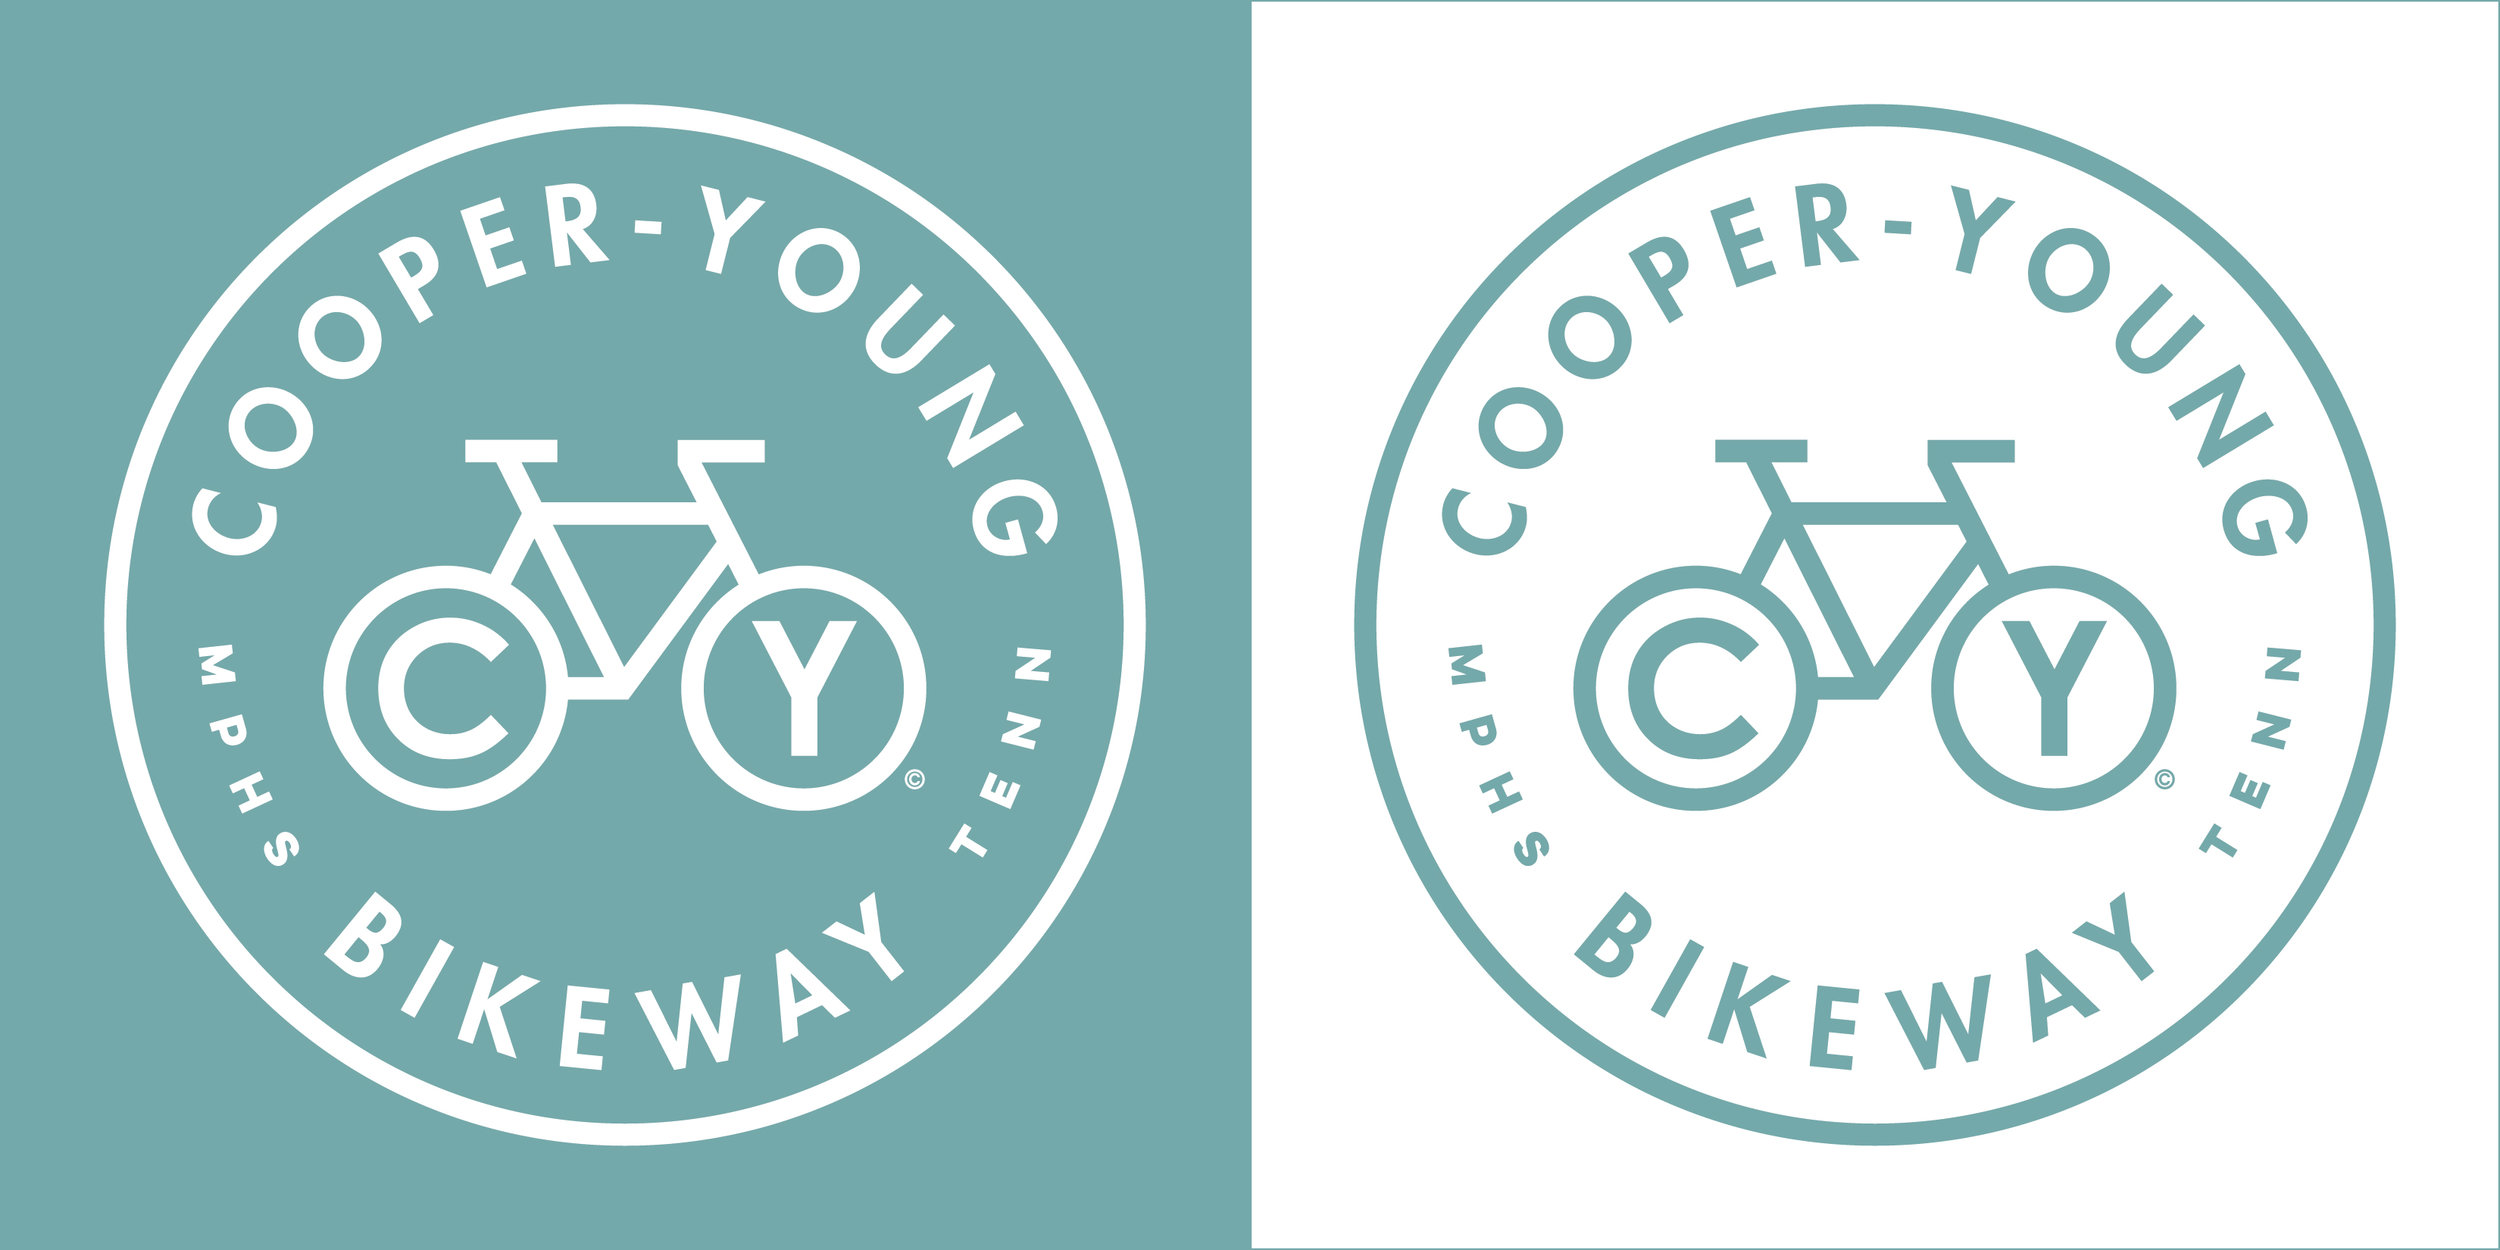  Proposed Cooper-Young Bikeway Project  Concept &amp; design © Chuck Mitchell 